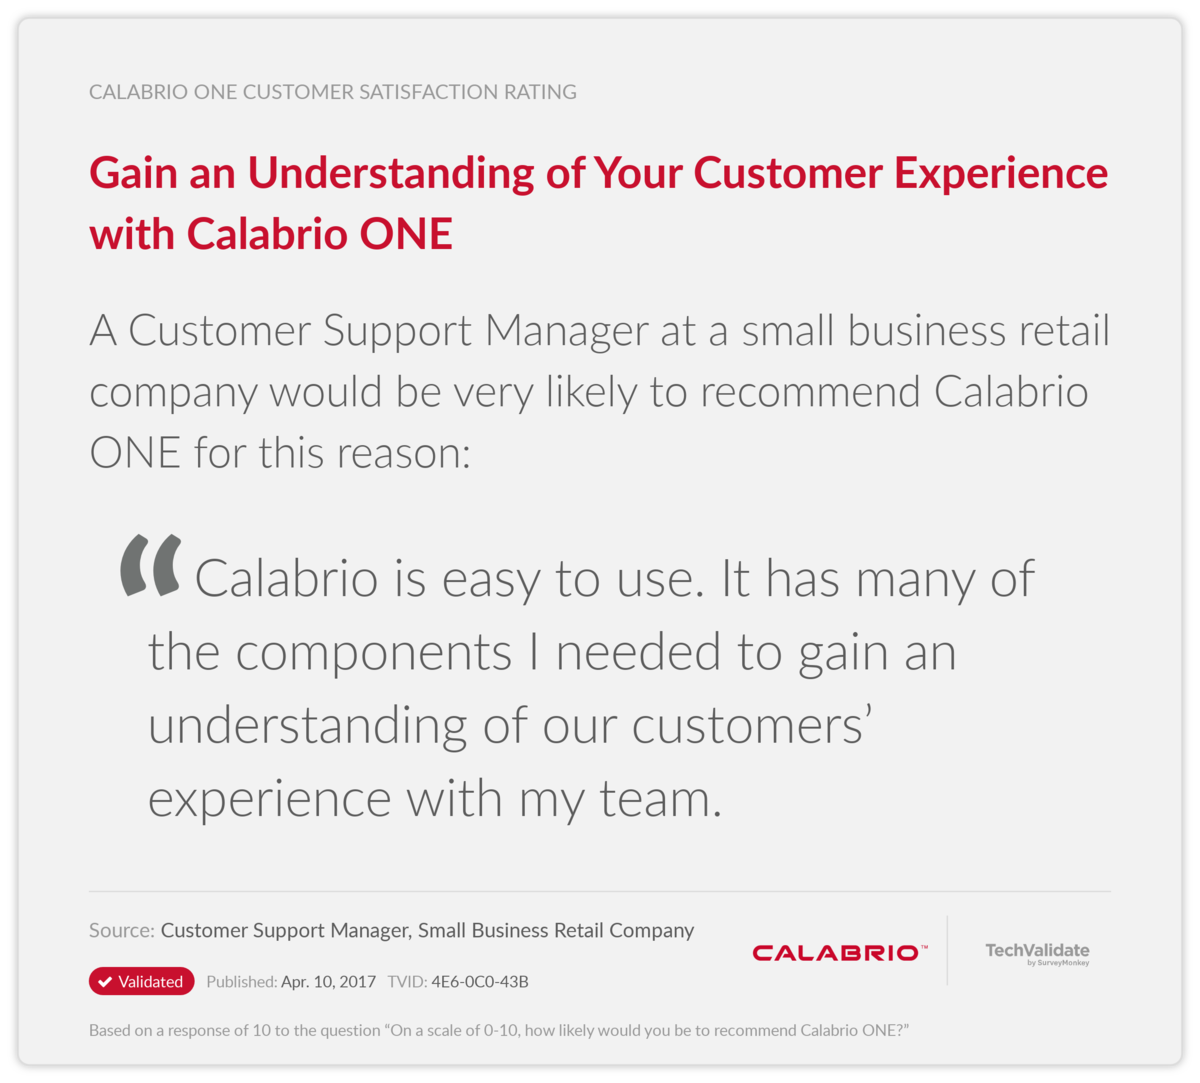 Gain an Understanding of Your Customer Experience with Calabrio ONE